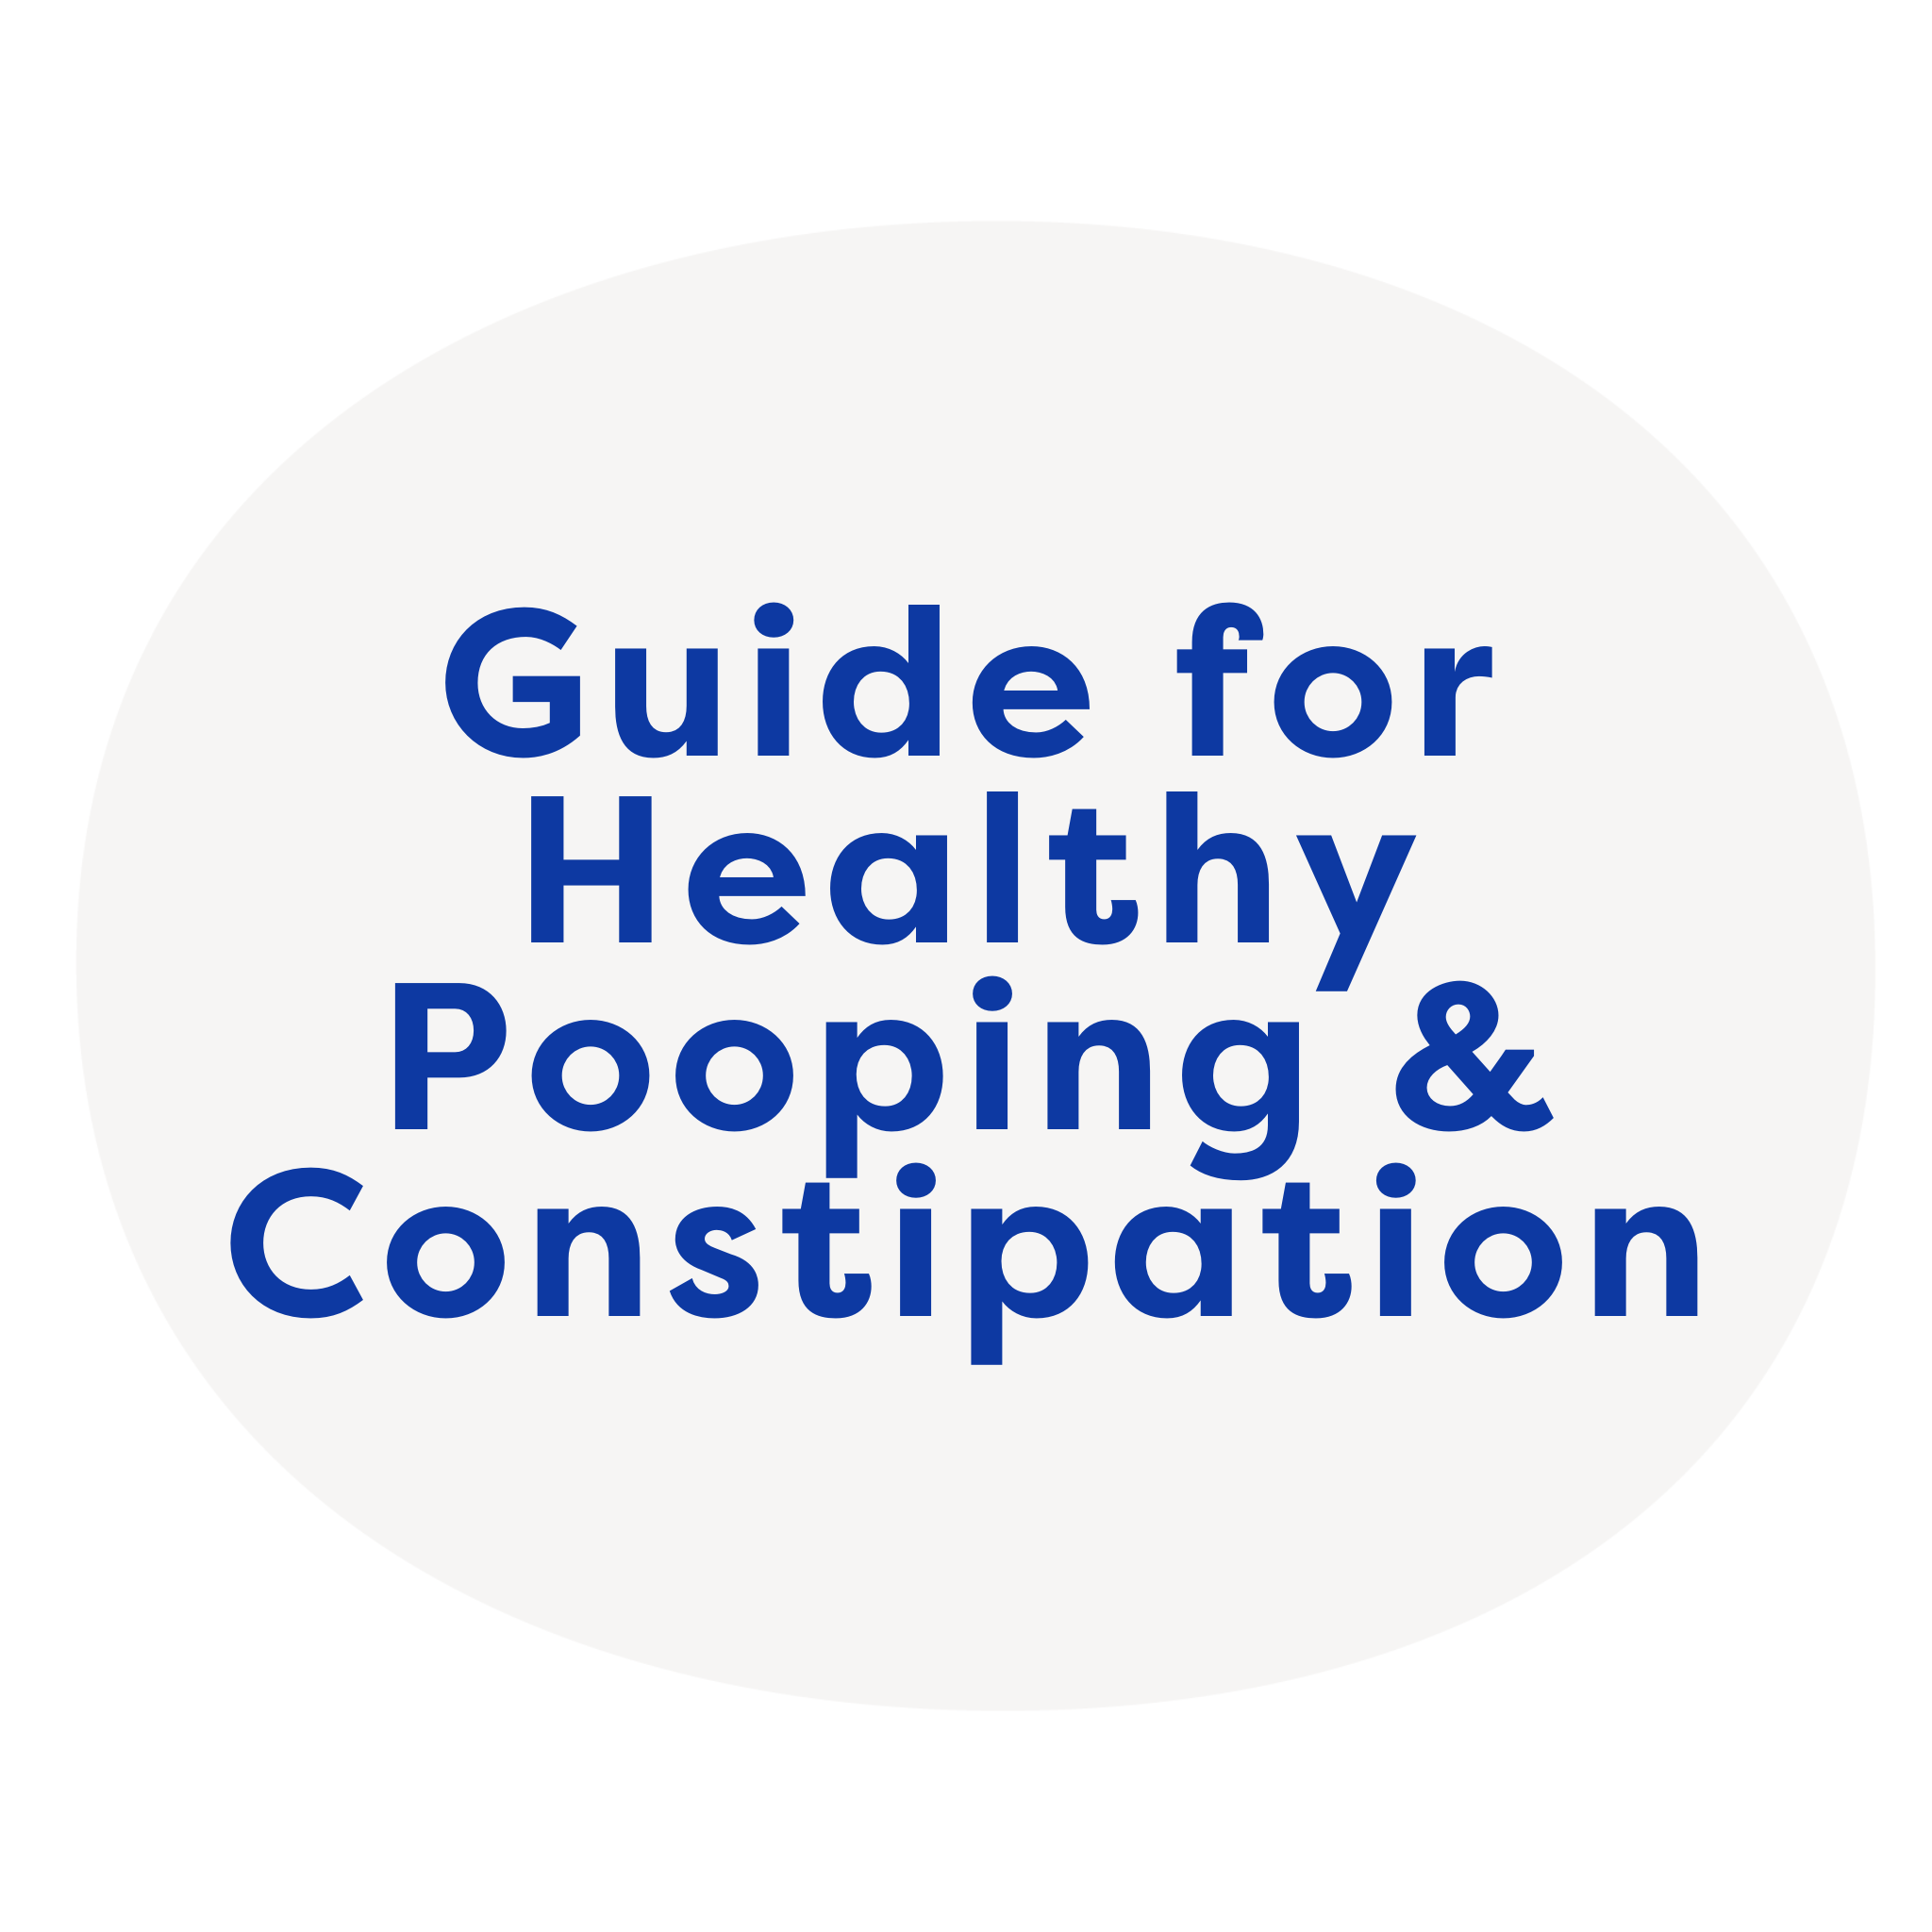 Guide for Healthy Pooping & Constipation